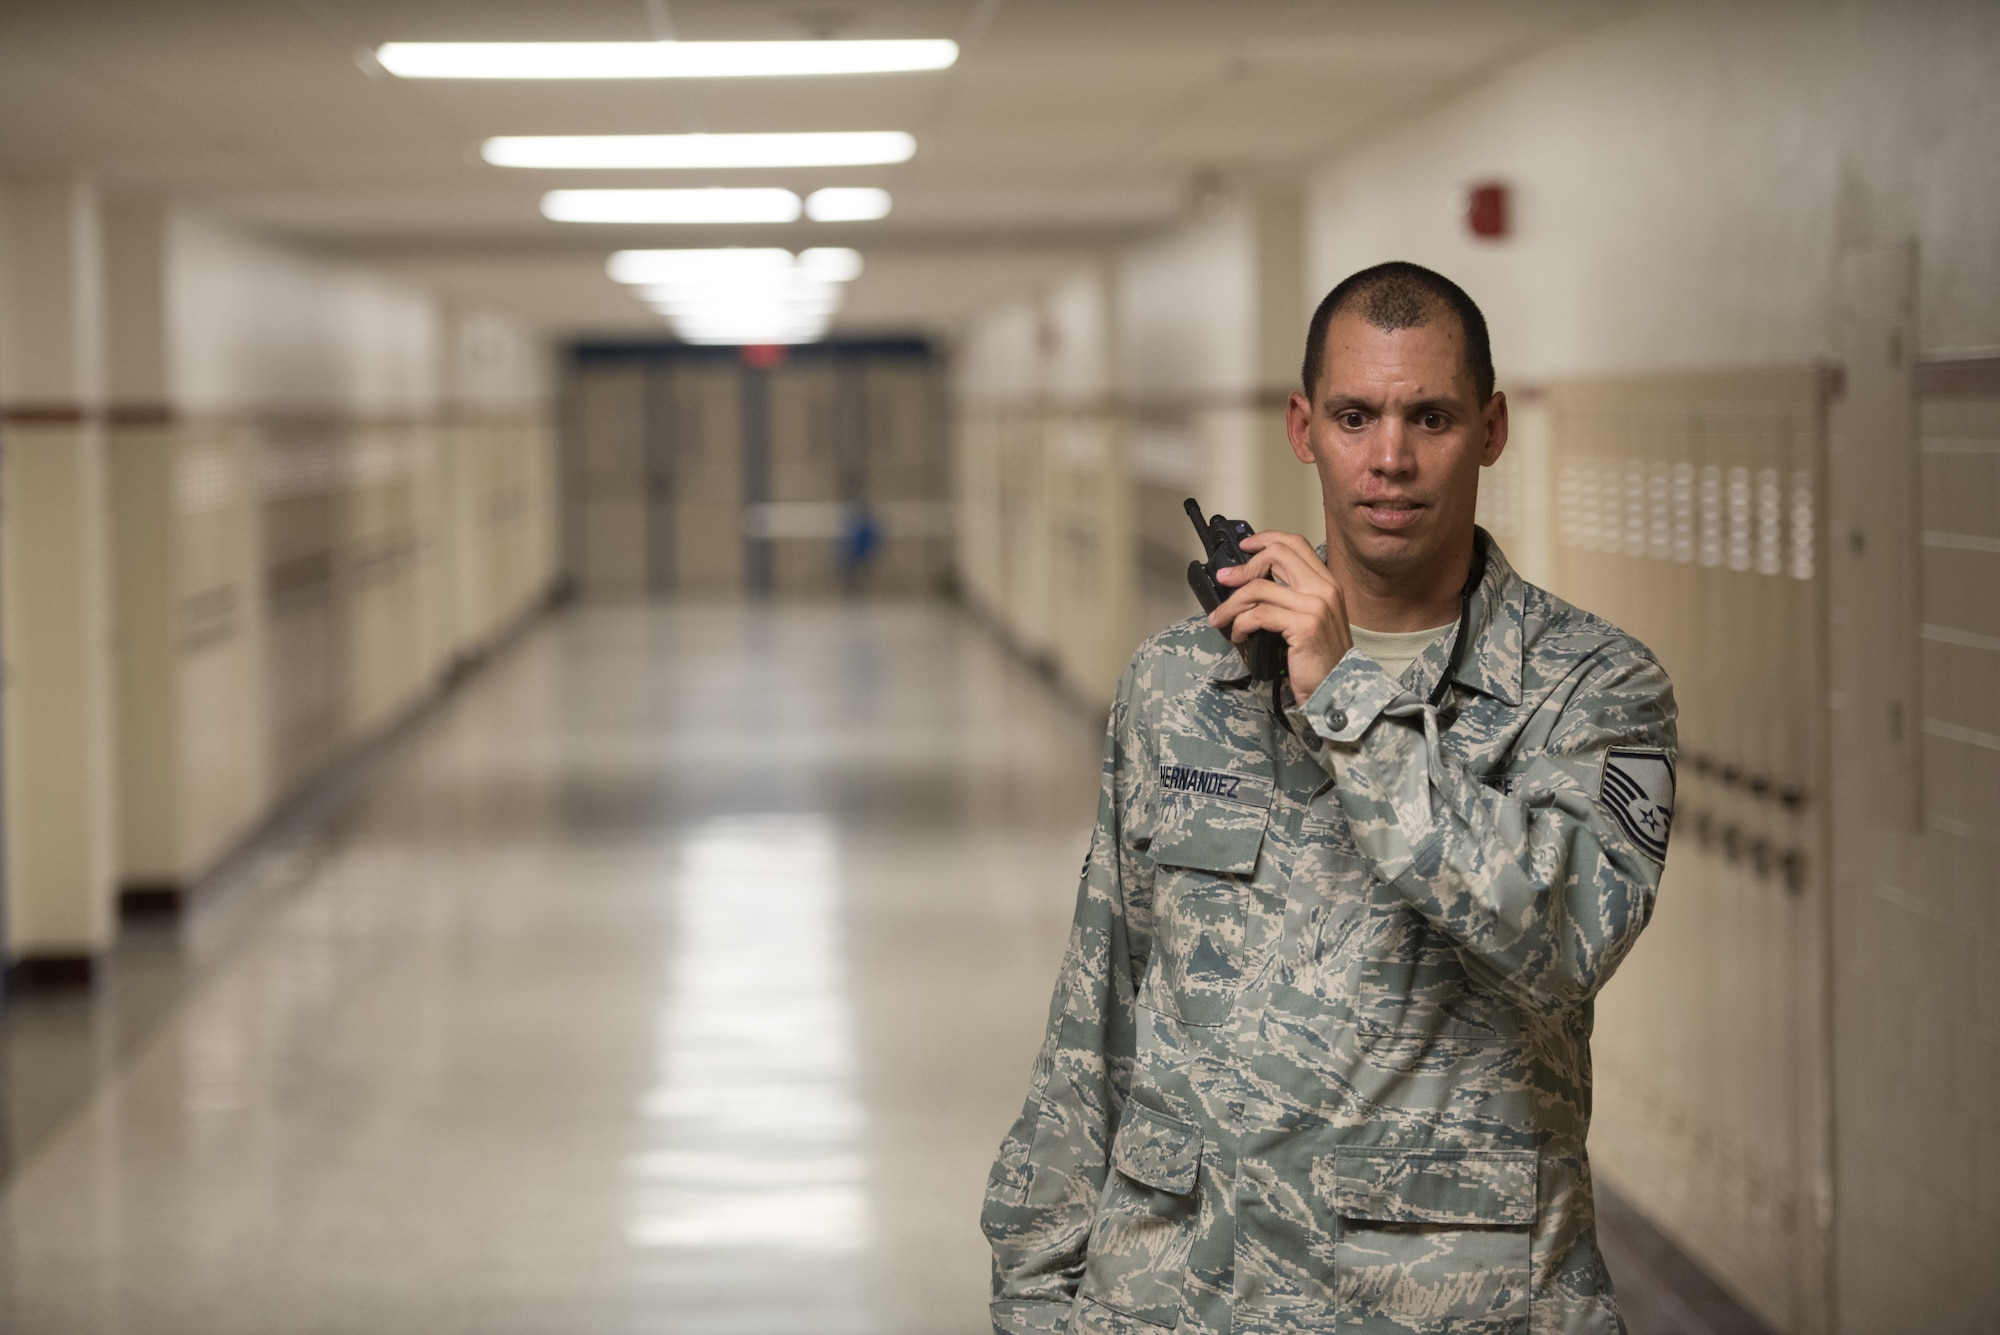 Master Sgt. Edwin Hernandez, NCOIC for Terminal 136 Joint Incident Site Communications Capability in the Puerto Rico Air National Guard’s 156th Airlift Wing, tests radio communications at Paducah Tilghman High School in Paducah, Ky., July 16, 2016, in preparation for Bluegrass Medical Innovative Readiness Training. The program will offer medical and dental care at no cost to residents in three Western Kentucky locations from July 18 to 27. (U.S. Air National Guard photo by Master Sgt. Phil Speck)